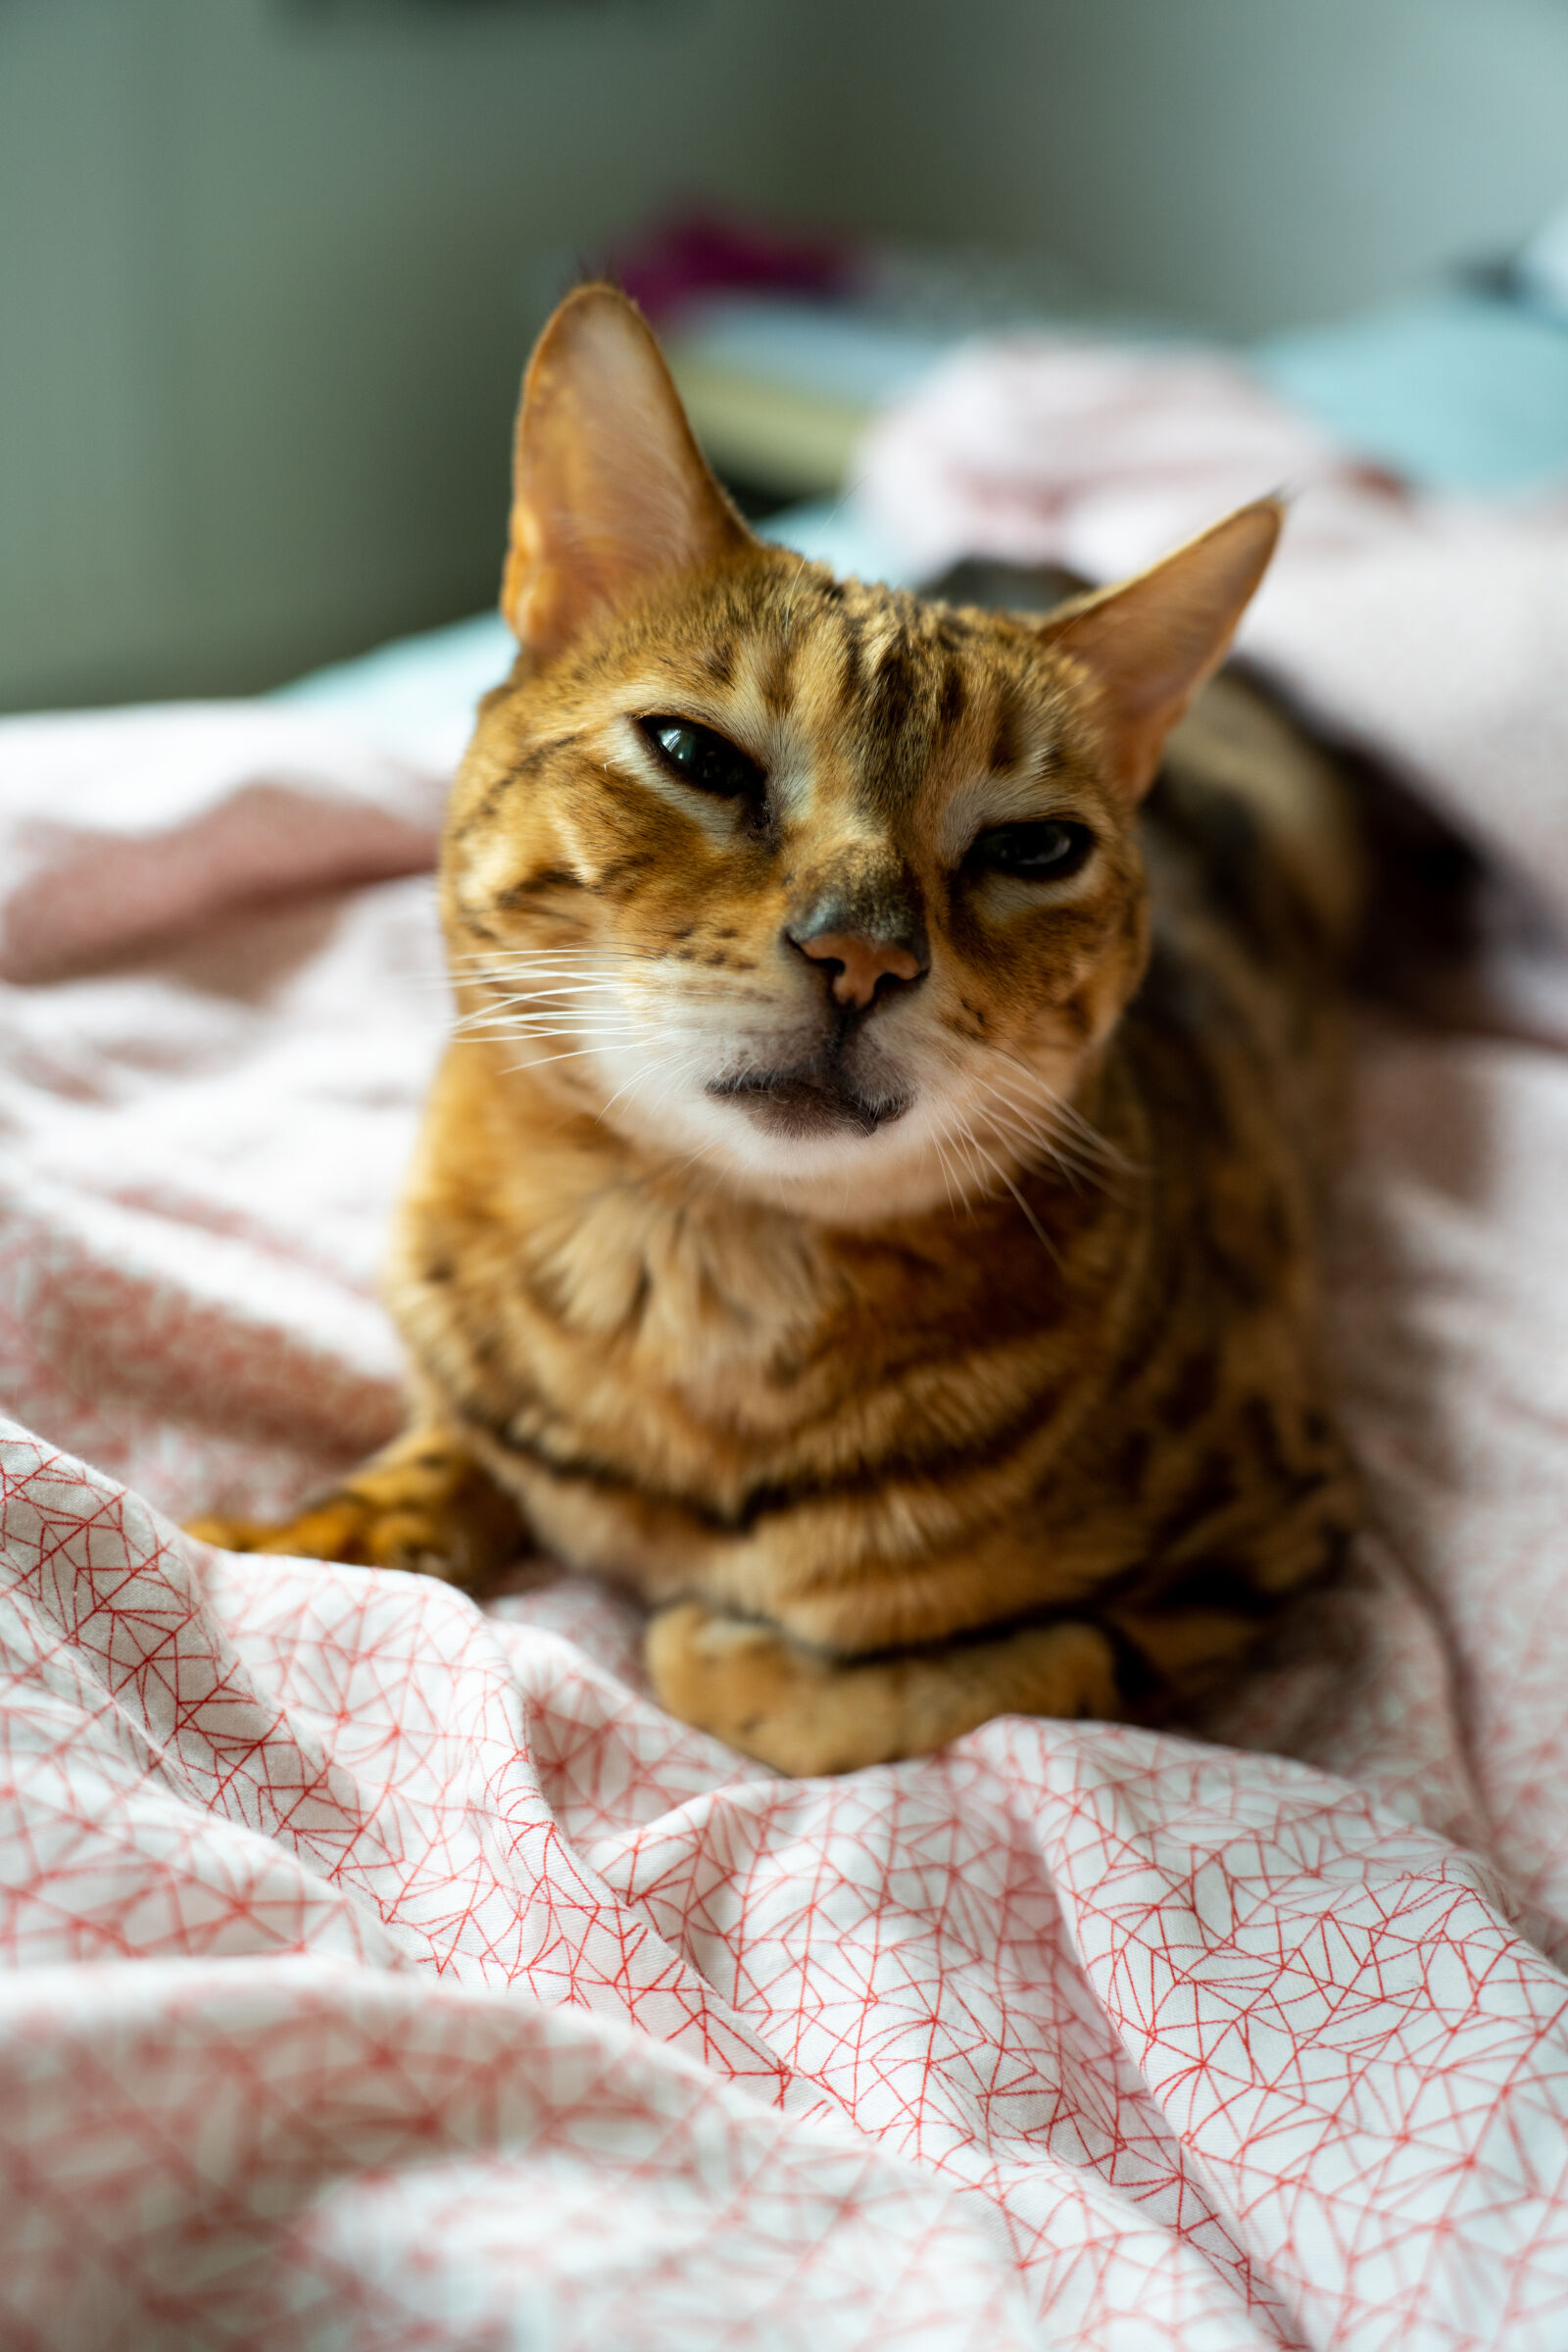 Sony a7R IV + Tamron 28-75mm F2.8 Di III VXD G2 sample photo. The cat analog photography